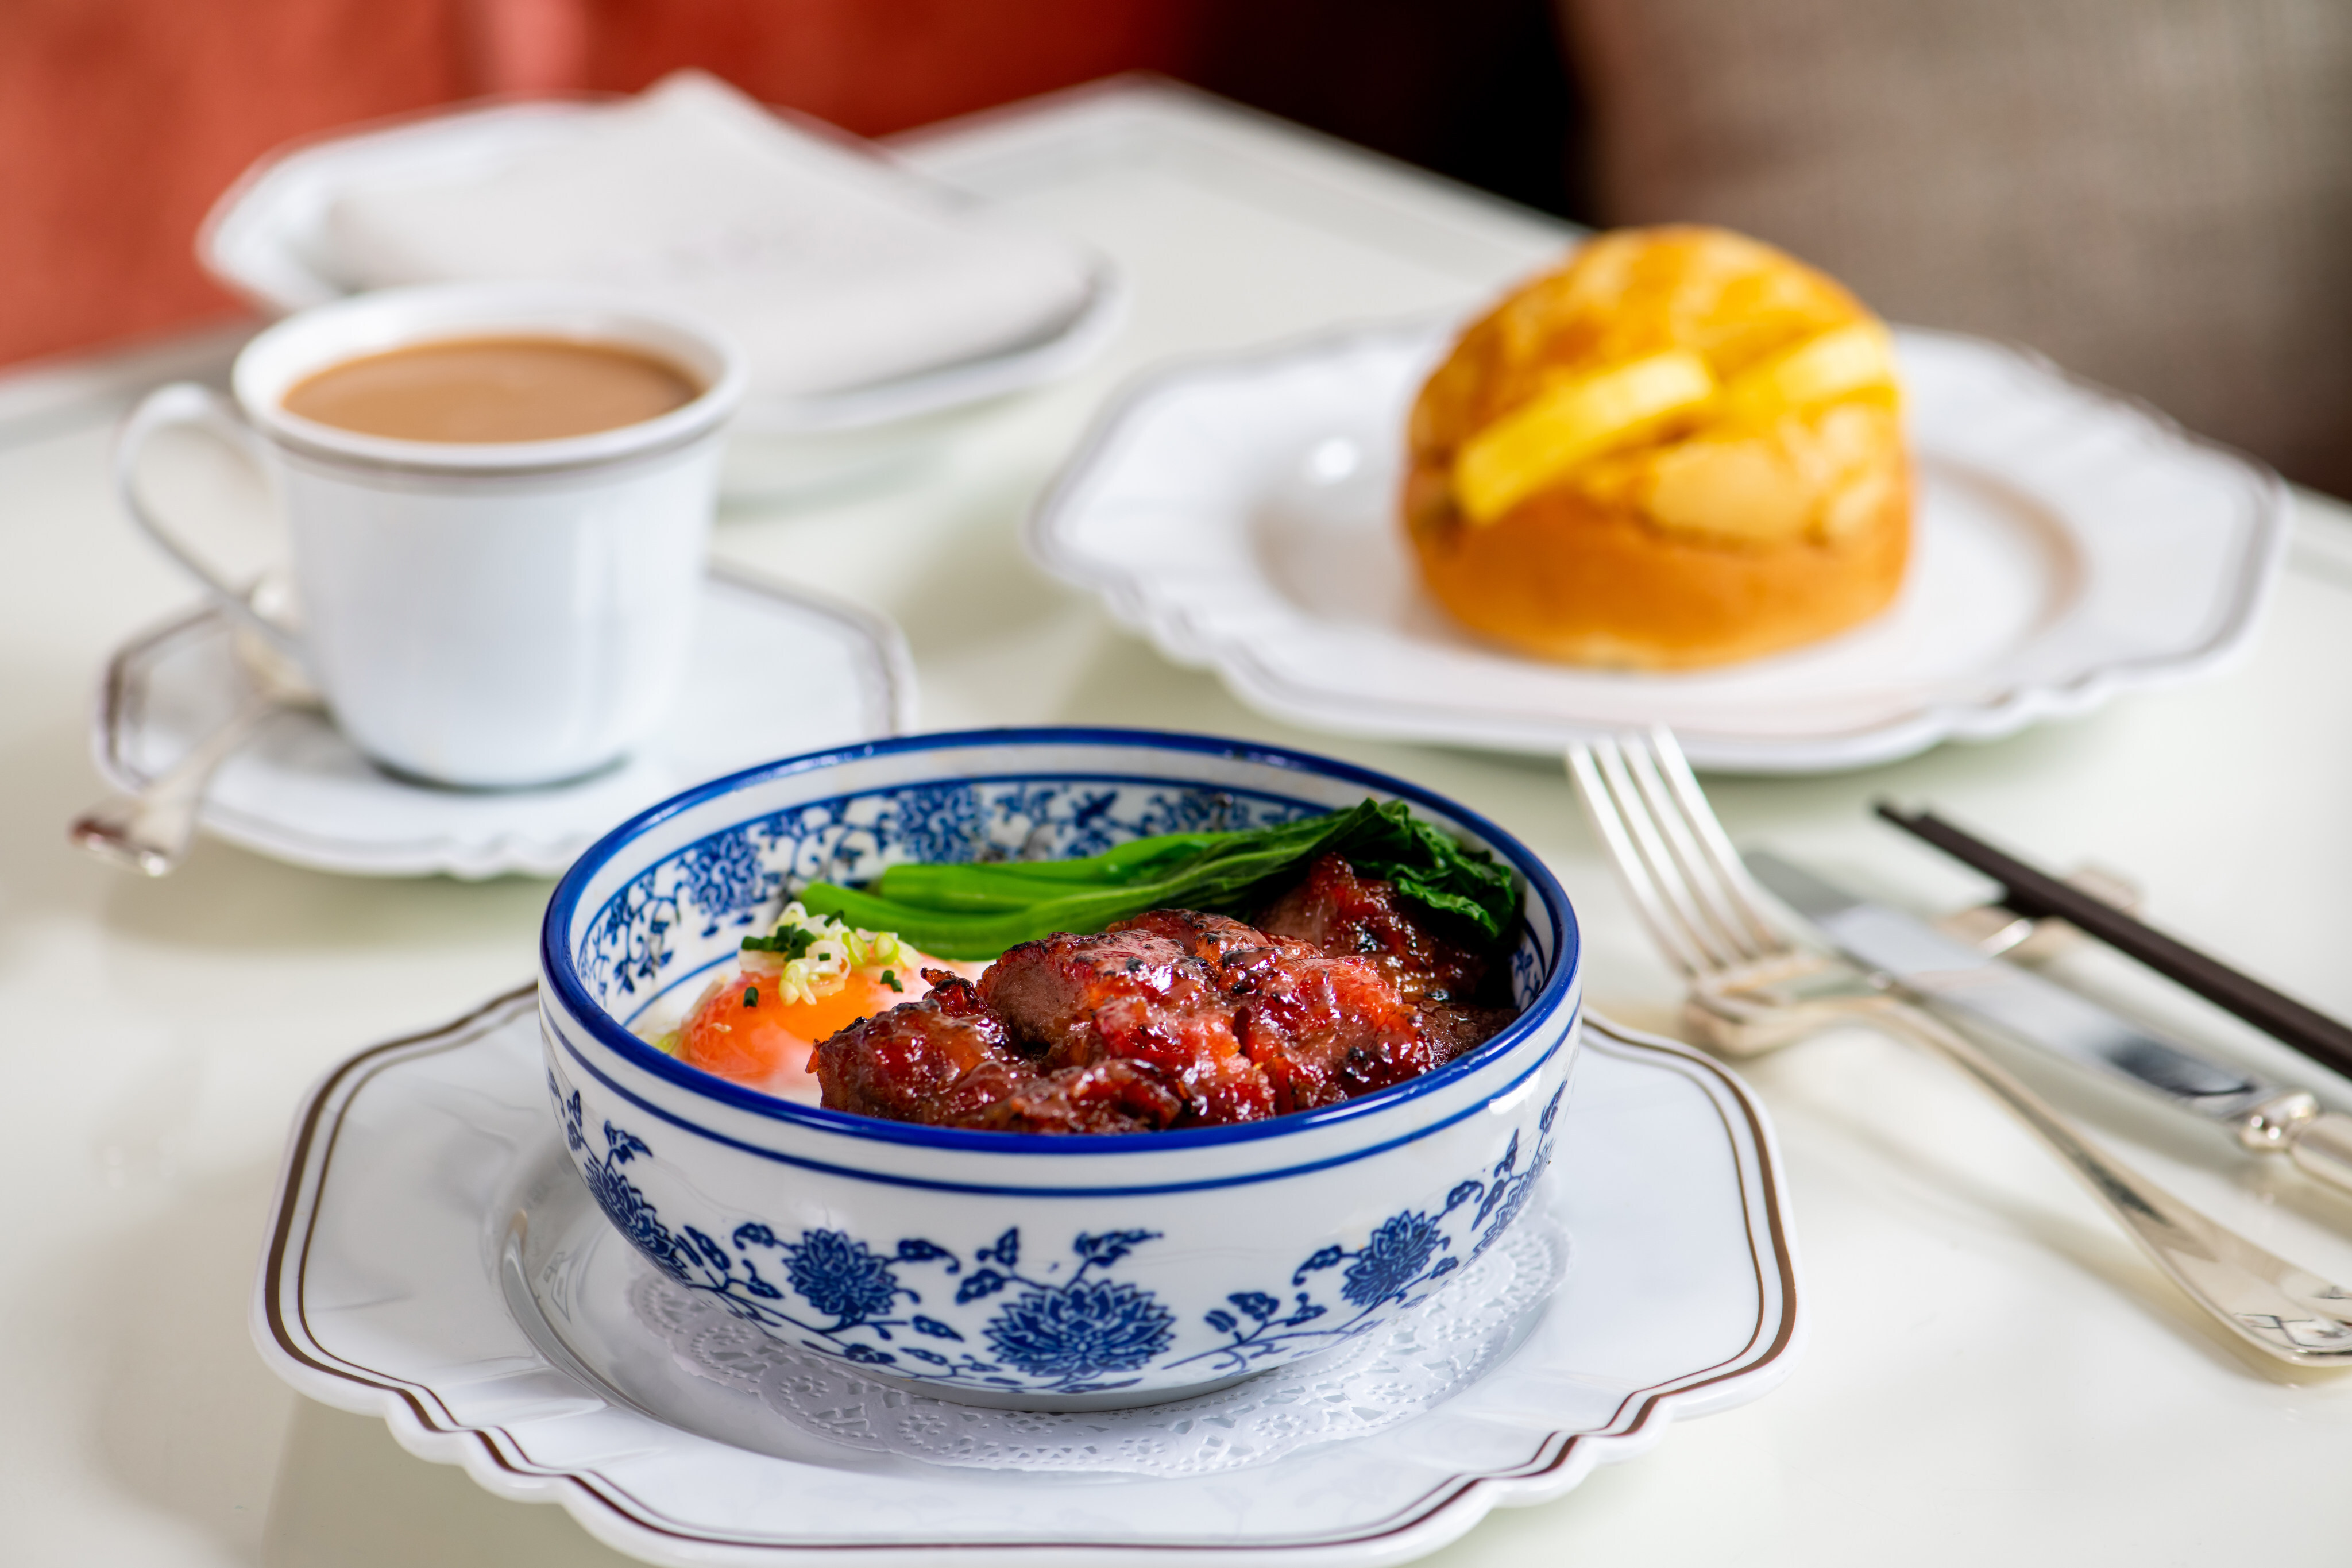 Char siu is a Cantonese classic, but which restaurant does it best? Check out our charts to find the meat to meet your expectations. Photo: Holt’s Cafe